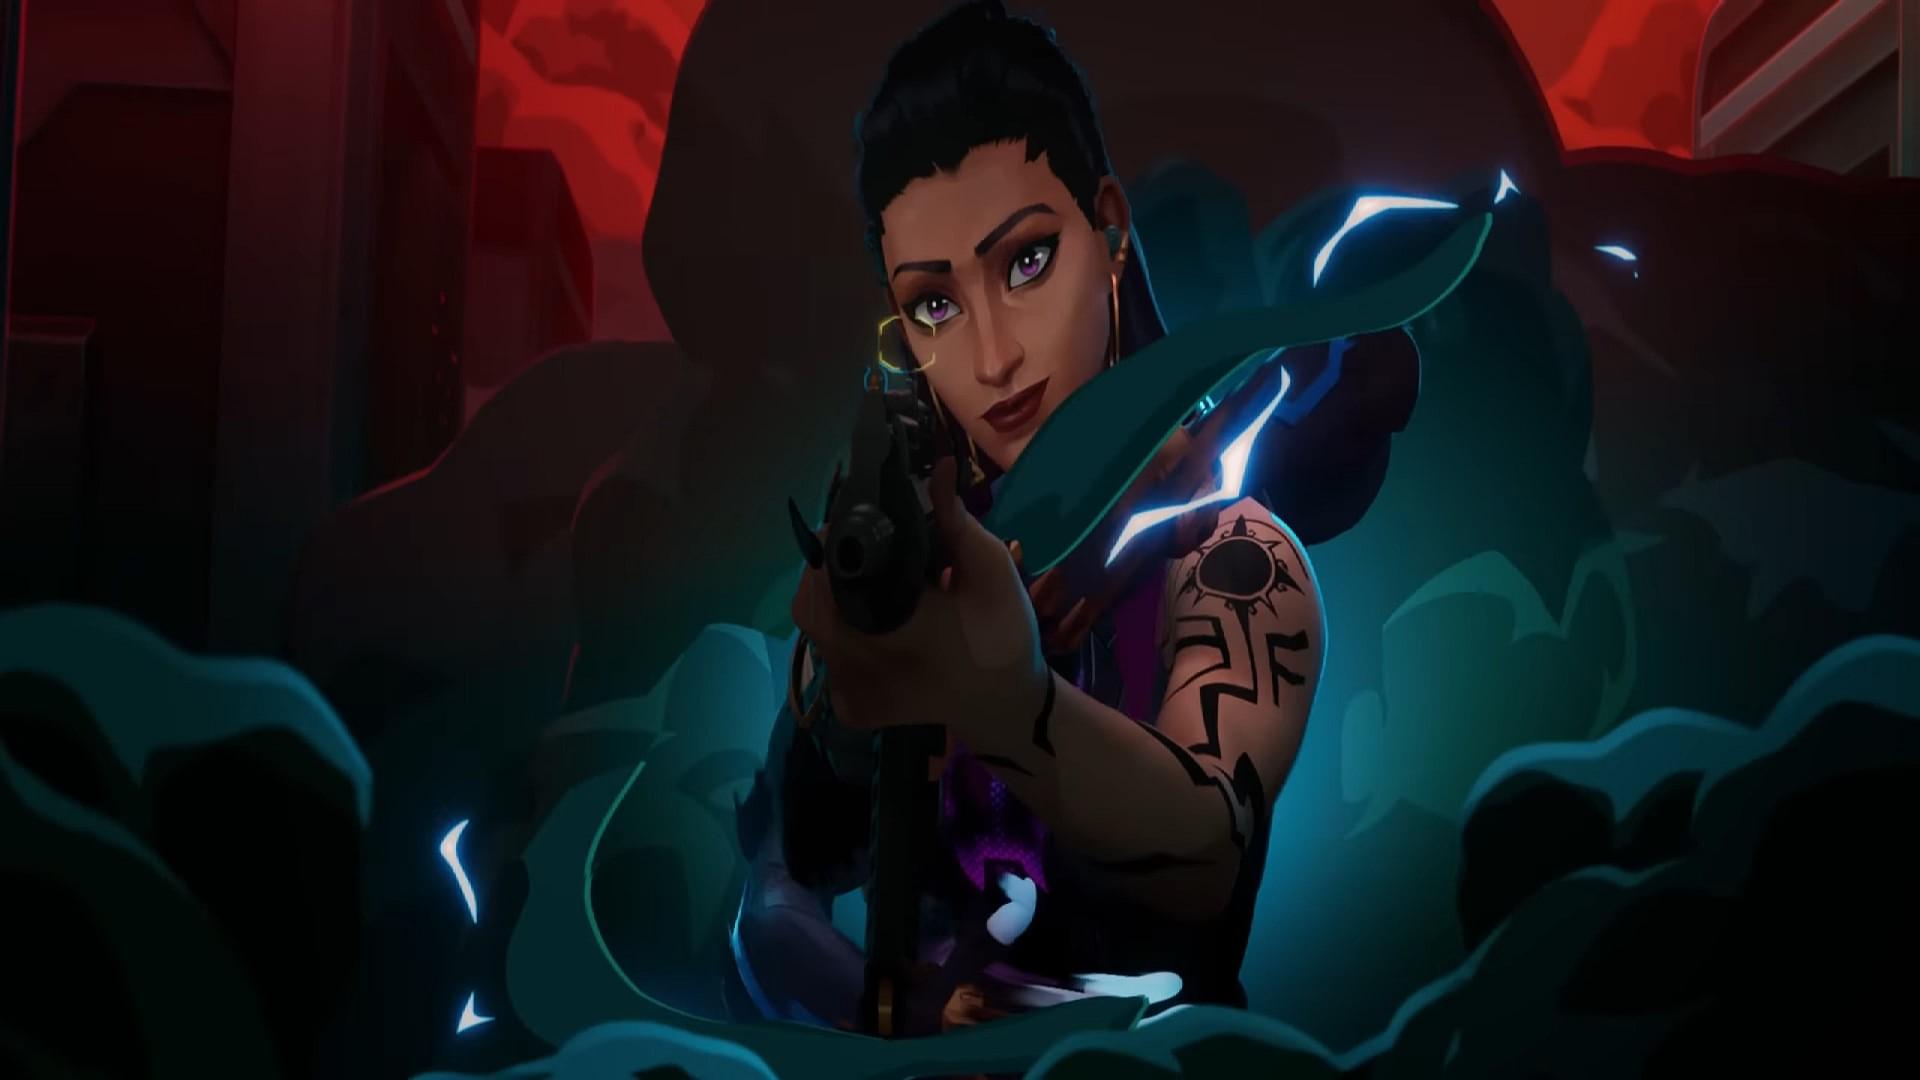 An image of Reyna in the Shattered Cinematic